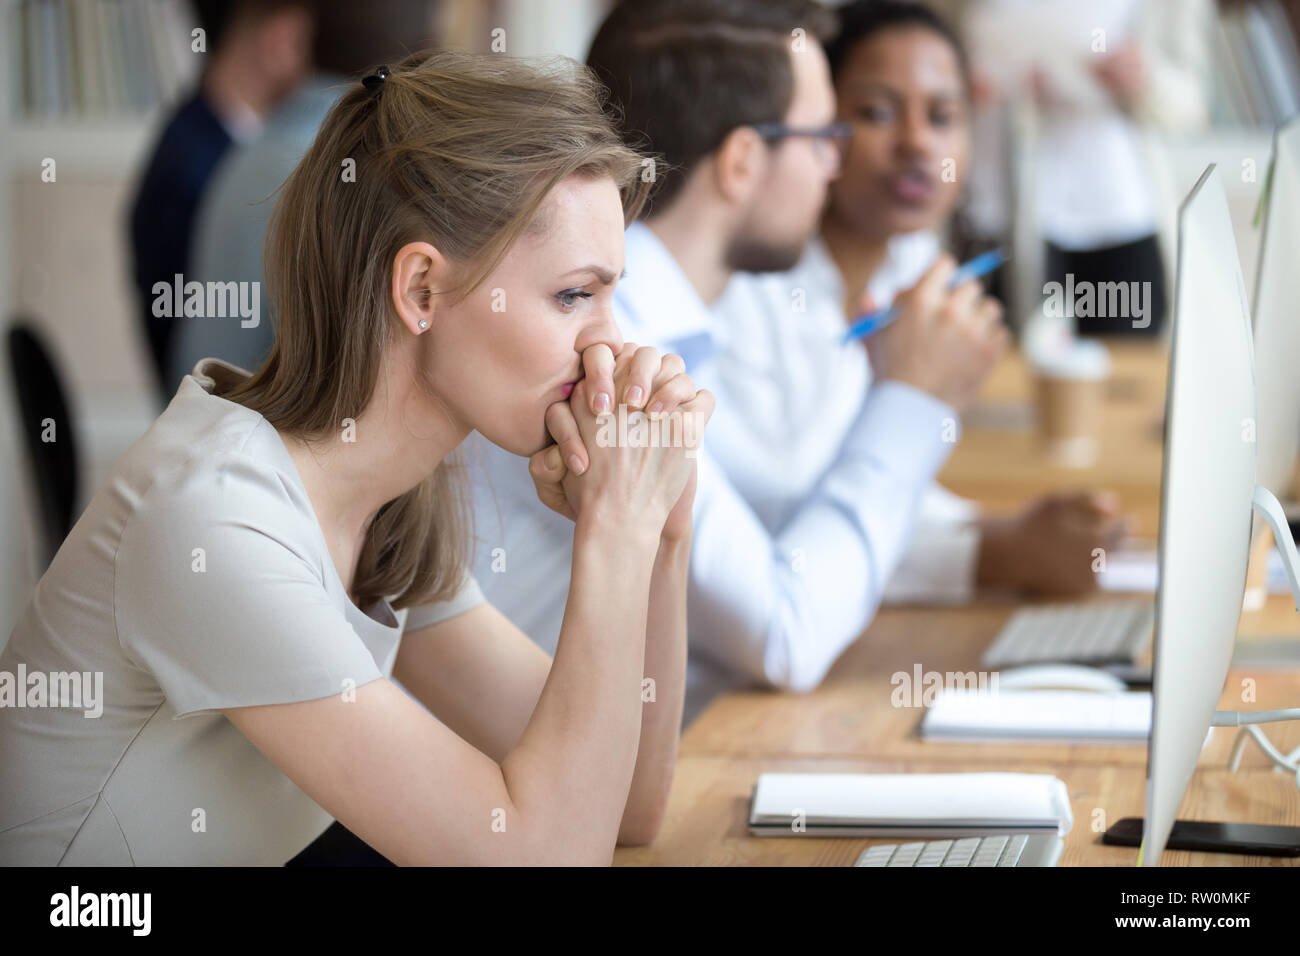 Woman employee having problem and doubts about business moments Stock Photo